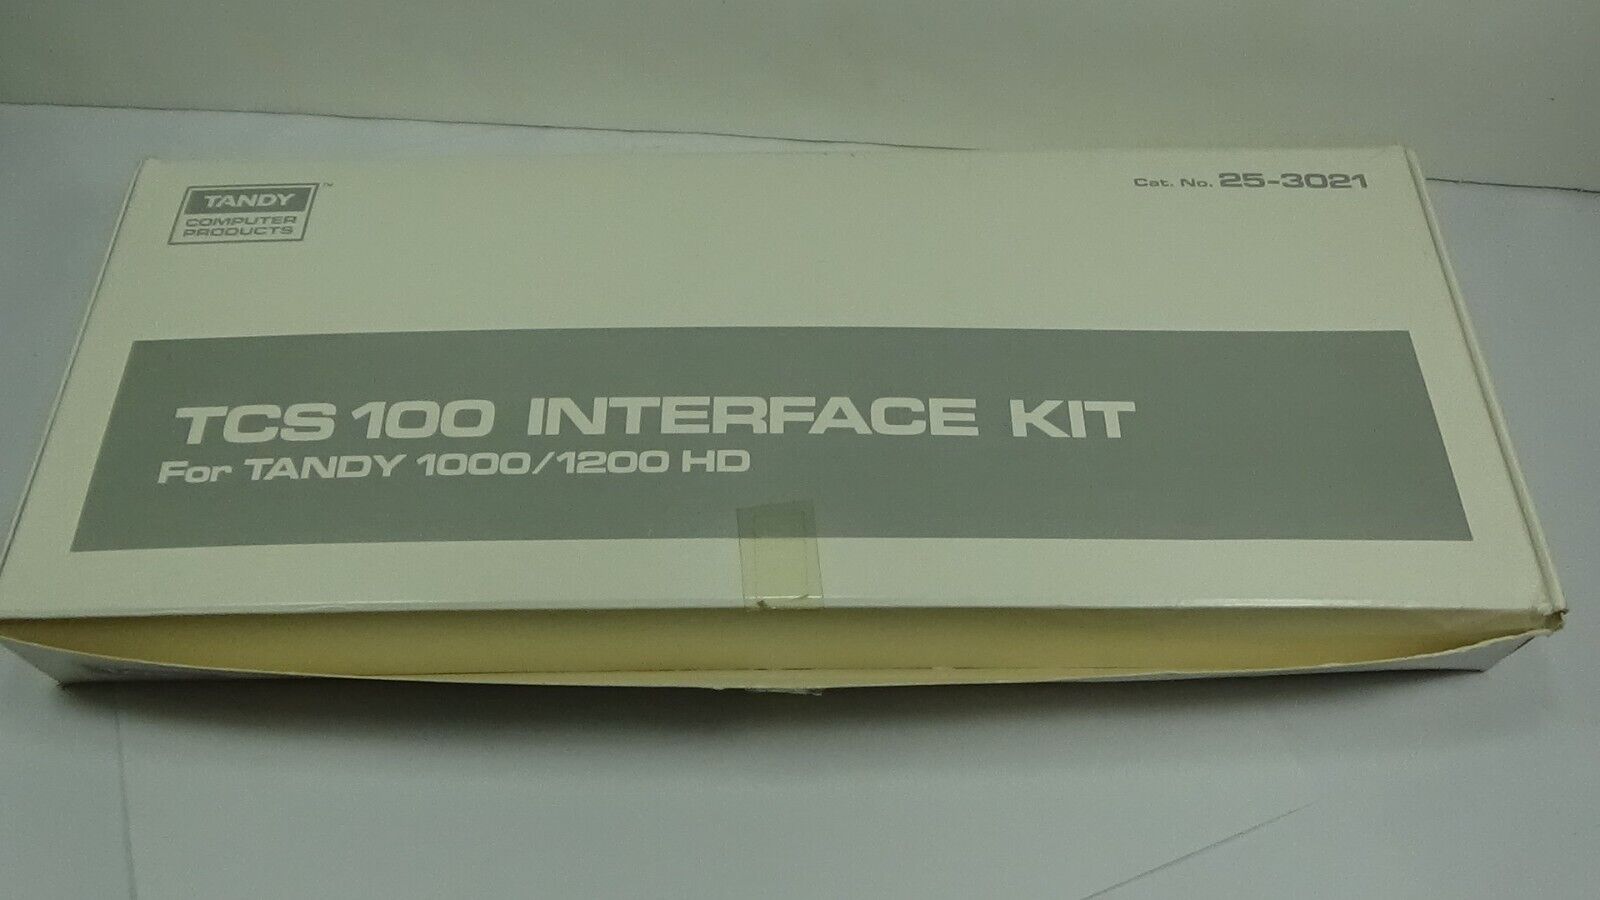 BOX ONLY TCS 100 INTERFACE KIT For TANDY 1000/1200 HD Cat. No. 25-3021